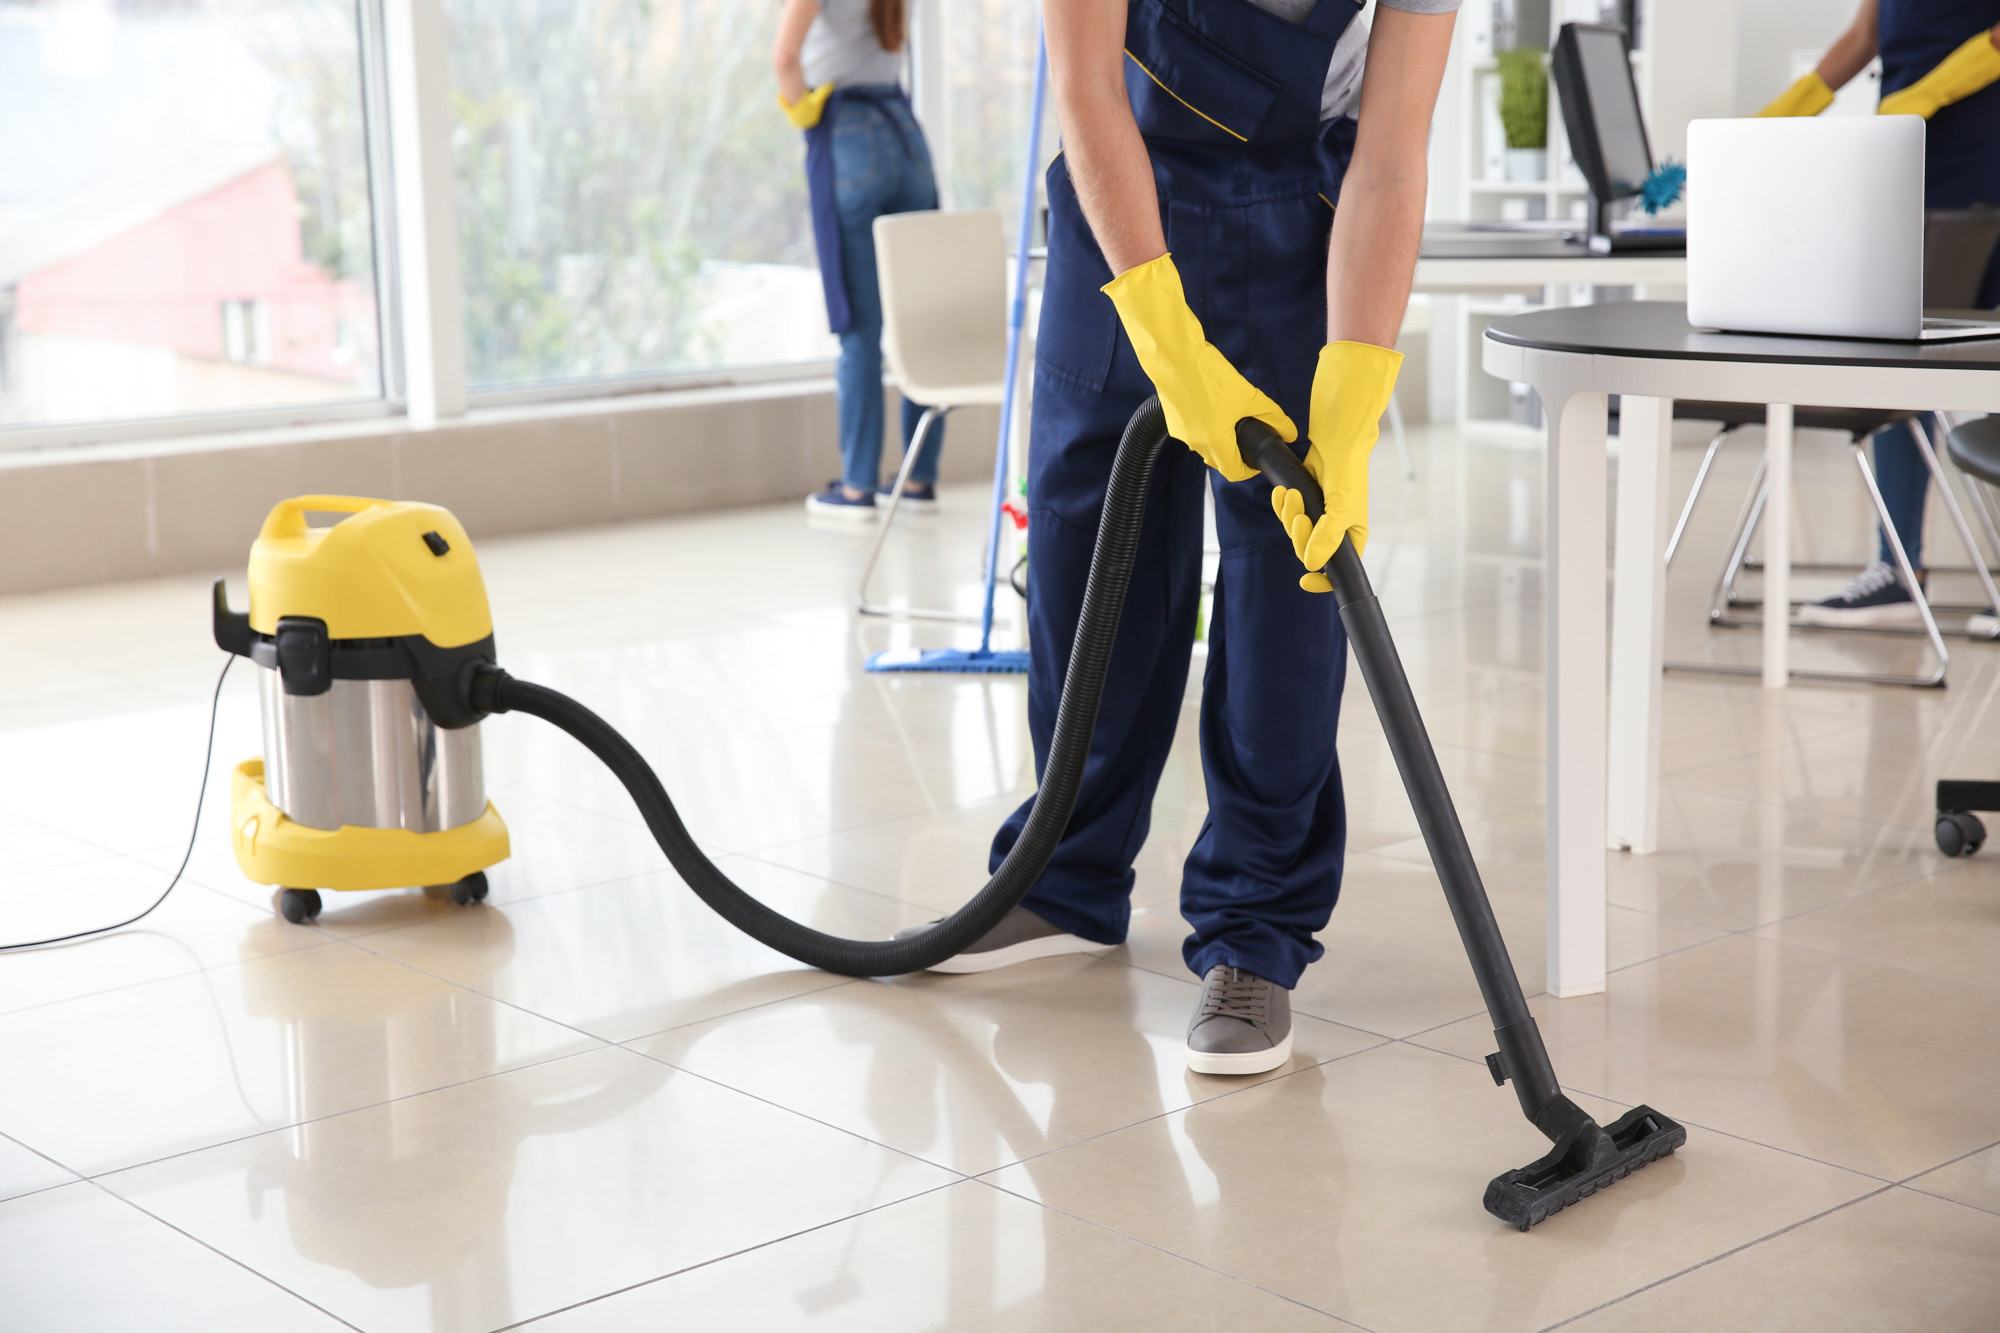 commercial cleaning services in Oklahoma City, OK